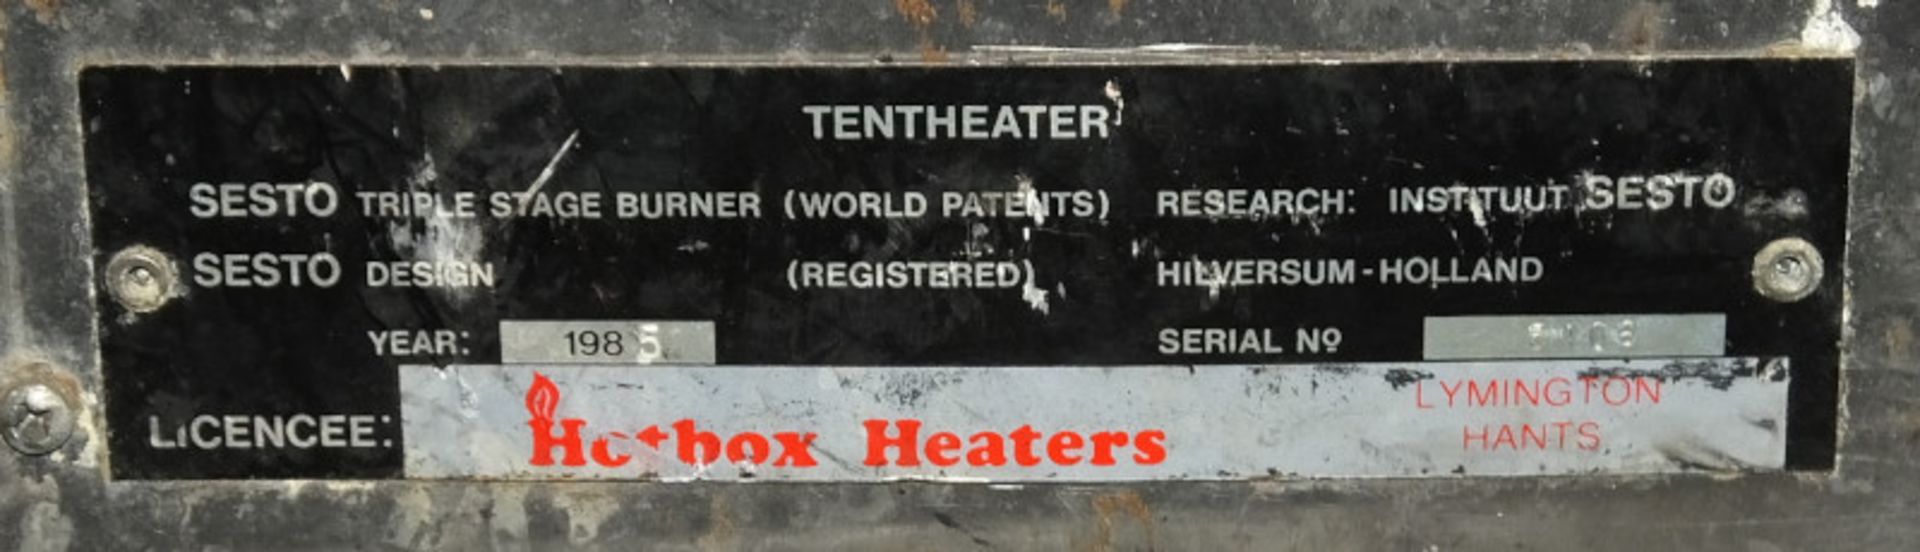 HotBox Heaters Tent Heater GHS III - NSN 4520-99-130-6045 Output - 5-15kW, Ex-MOD specific - Image 8 of 12